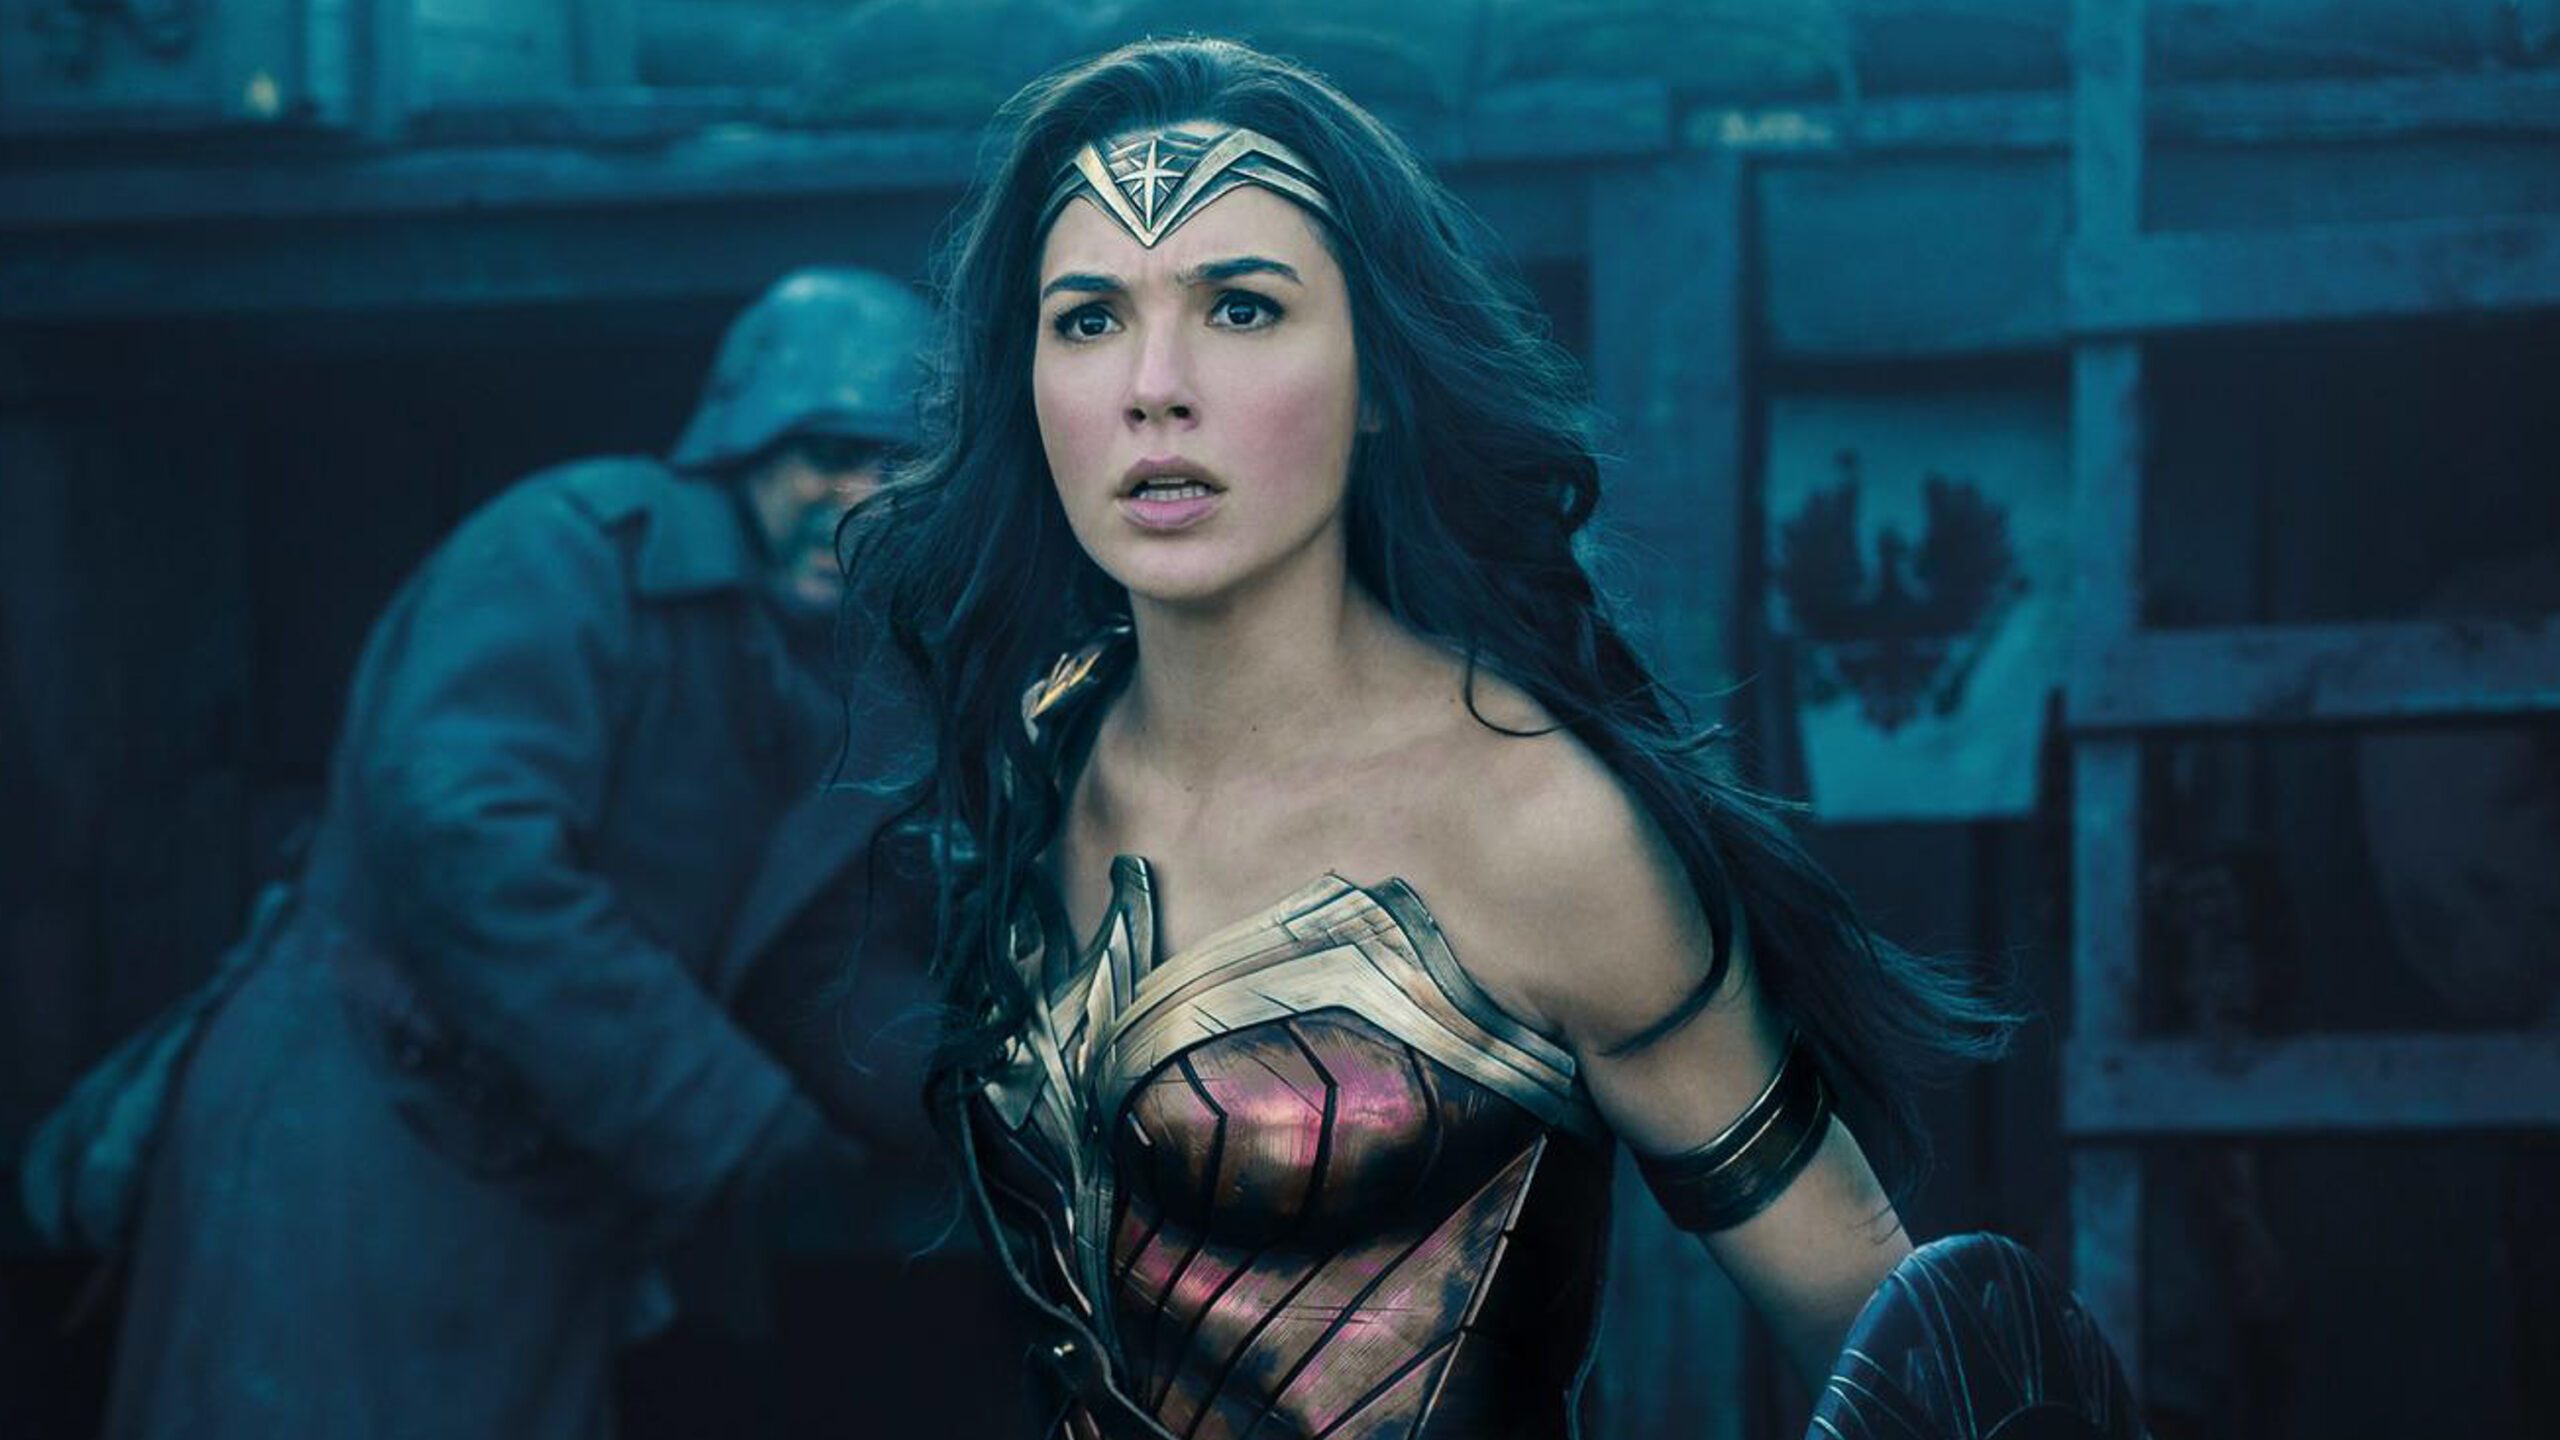 ‘Wonder Woman’ blasts to top of US box office